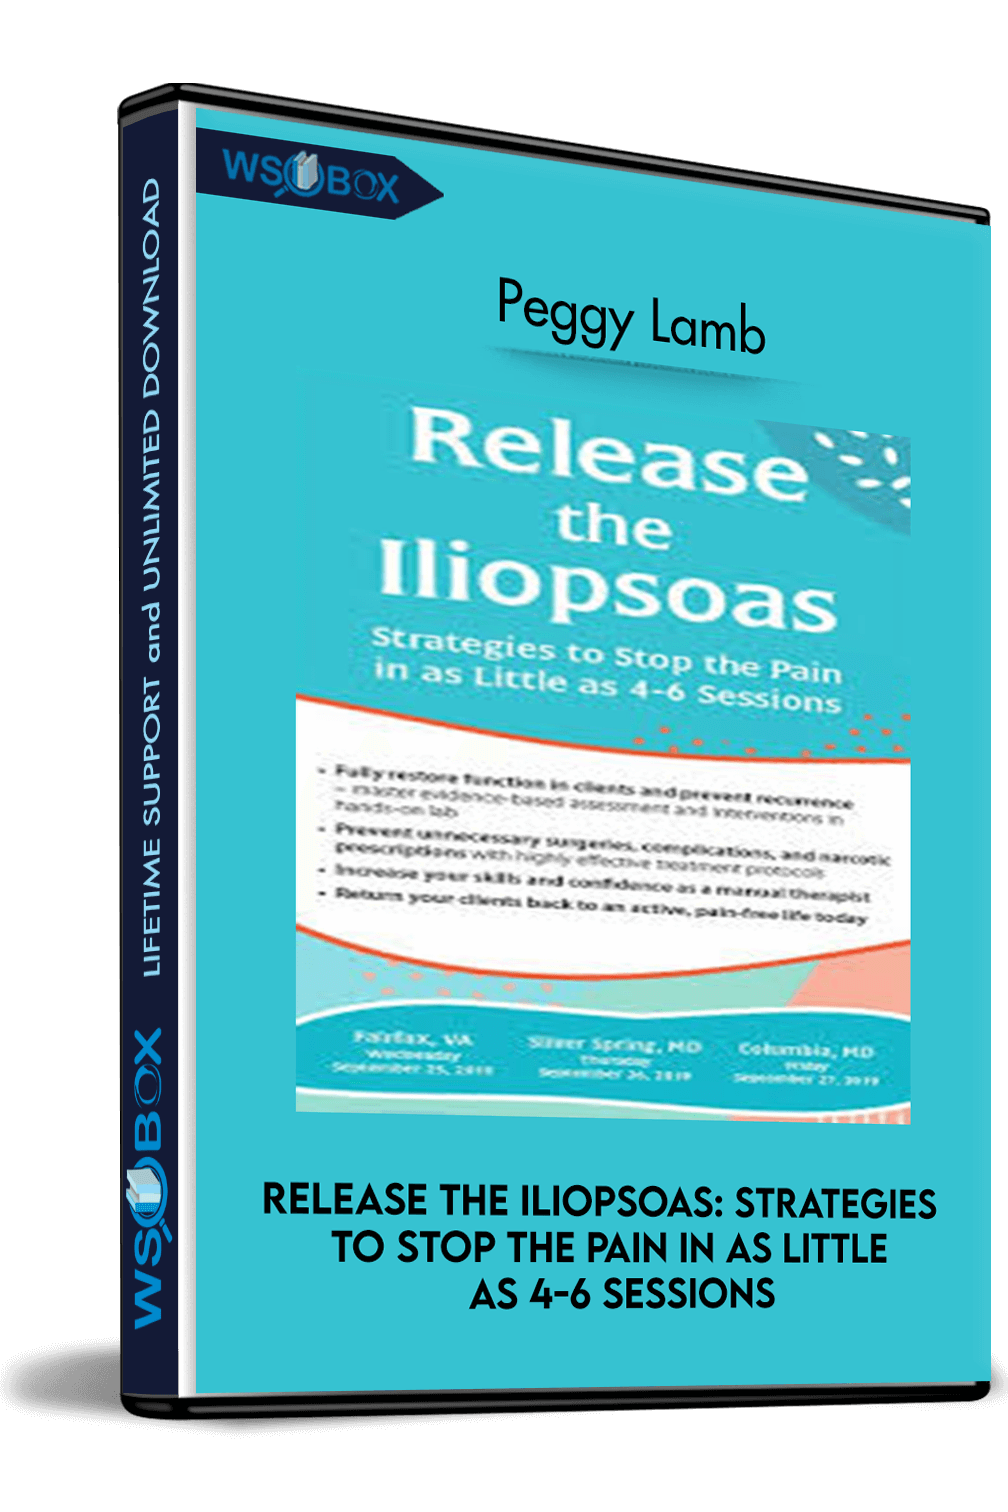 release-the-iliopsoas-strategies-to-stop-the-pain-in-as-little-as-4-6-sessions-peggy-lamb